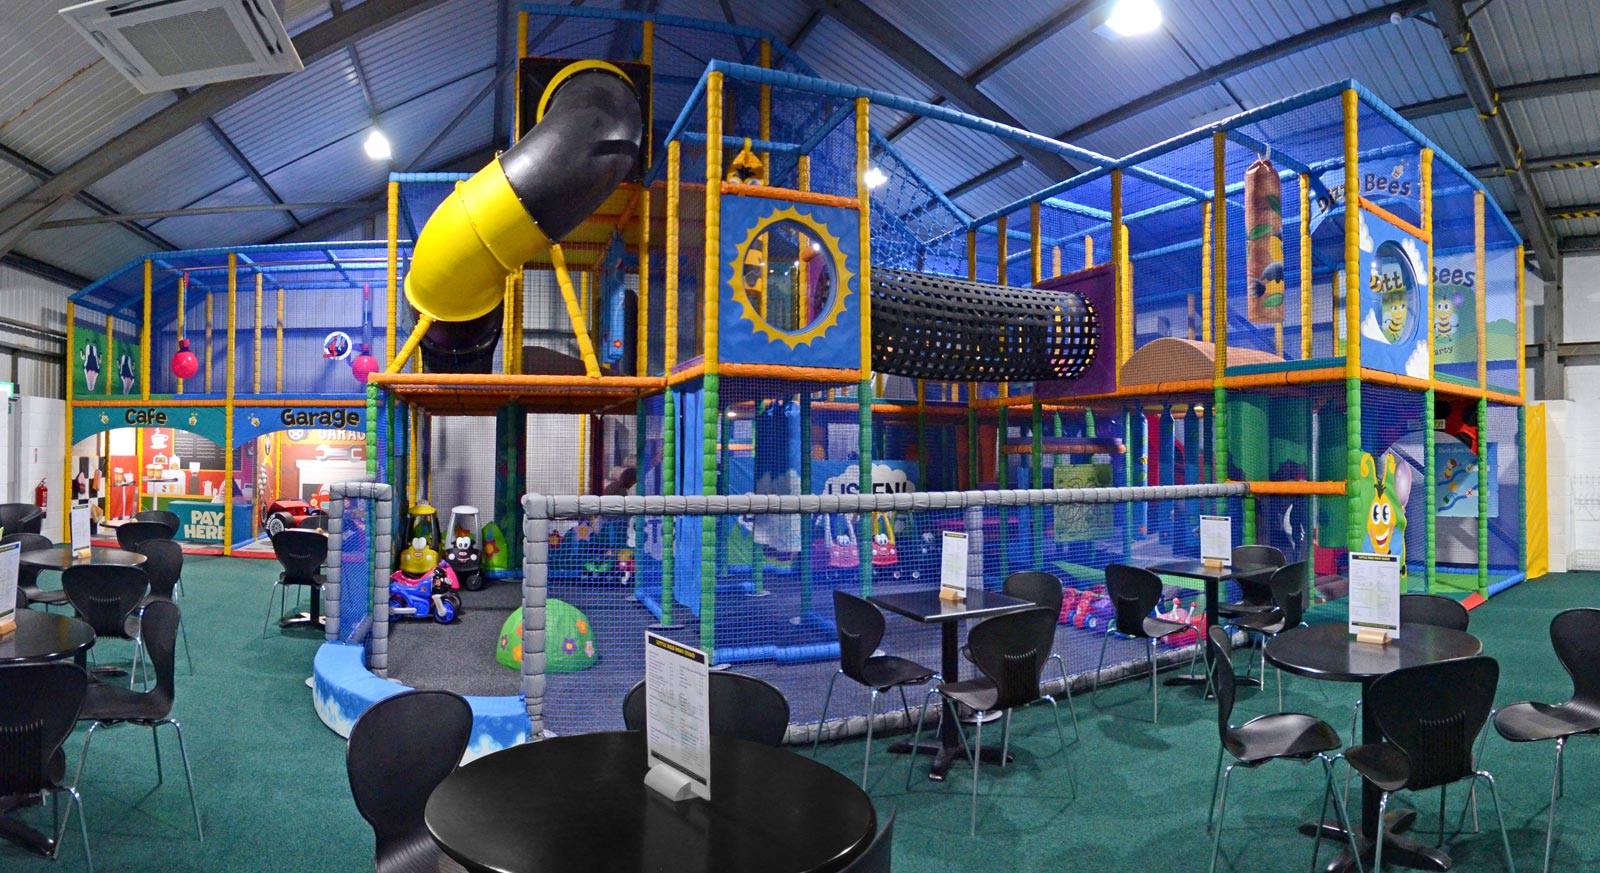 New Little Bees Soft Play Area in Leeds